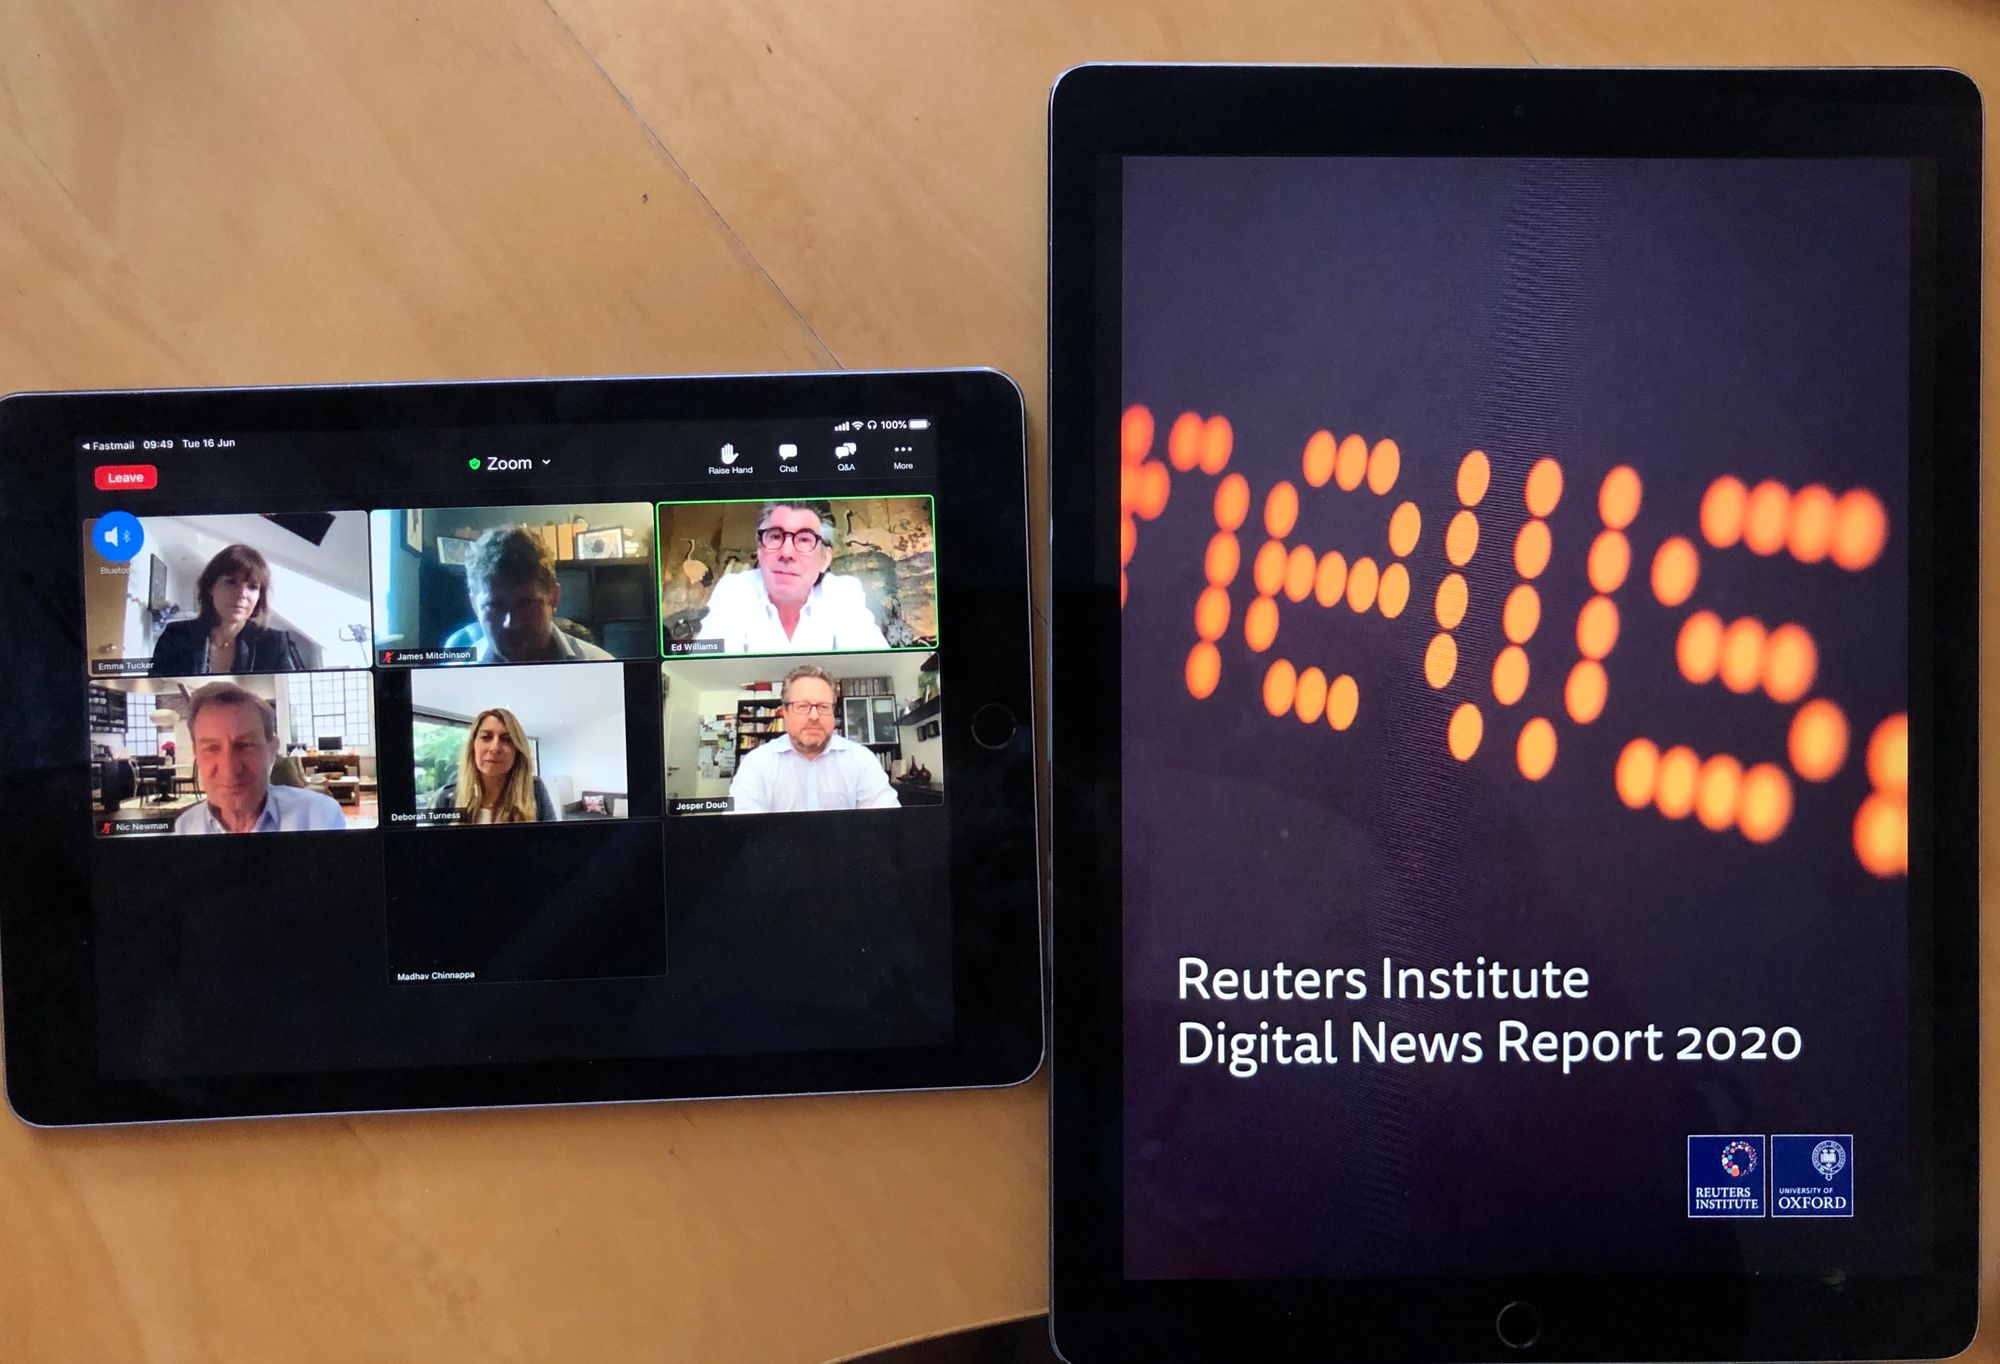 Digital News Report 2020: the trust crisis and its solutions